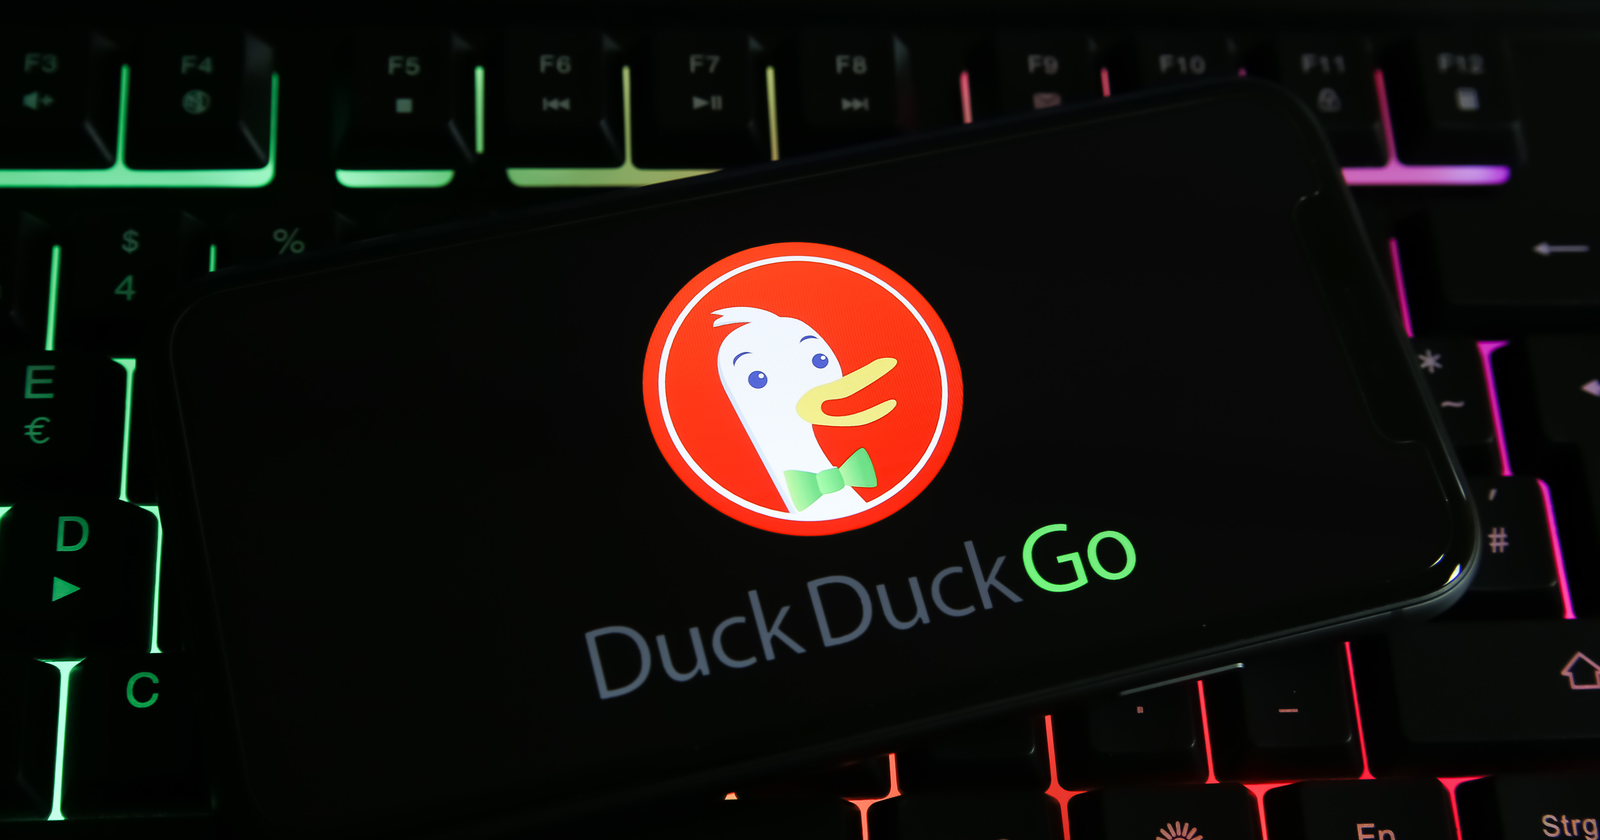 DuckDuckGo Reaches 100B Searches, But Growth Is Slowing Down